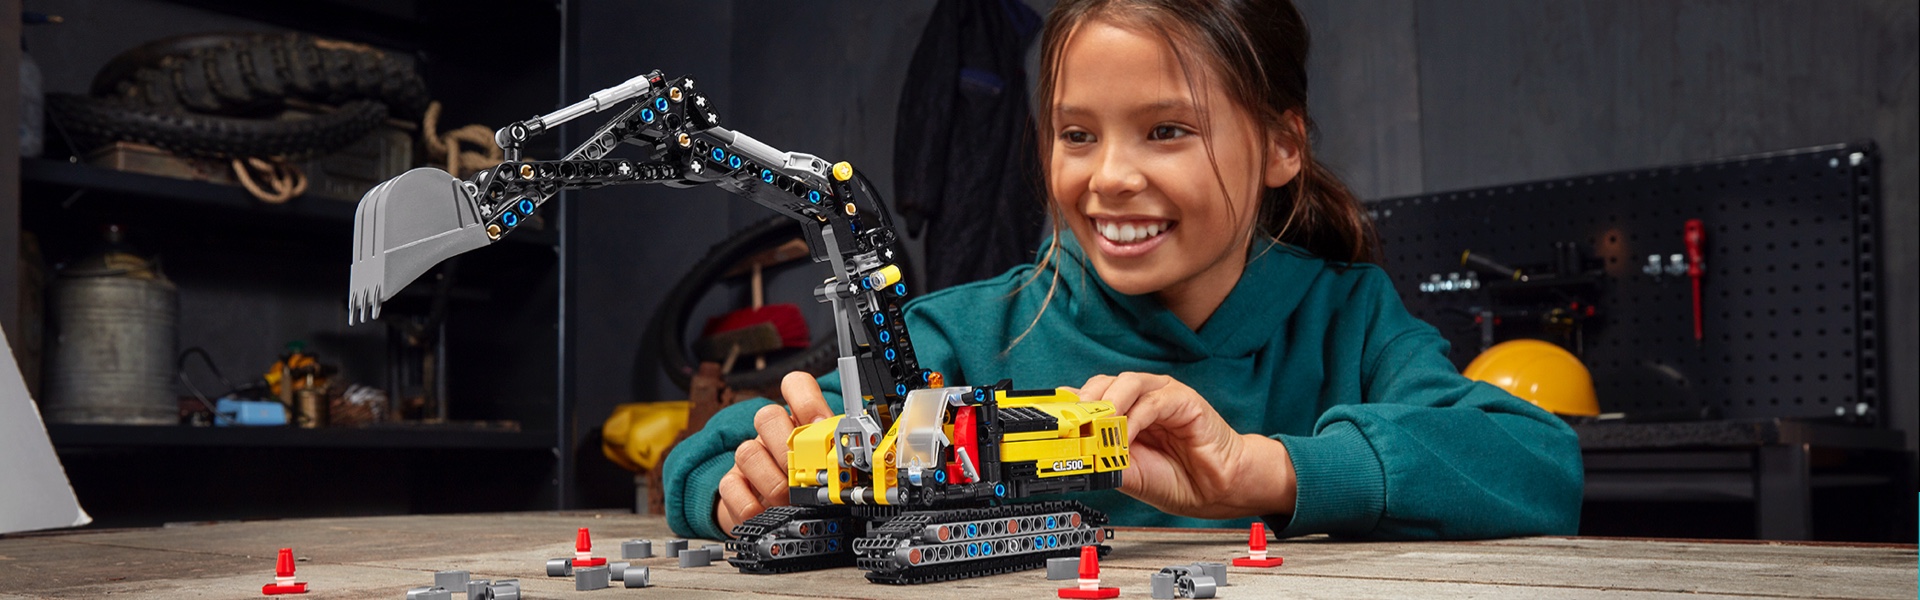 8 Best LEGO® Construction Vehicle Toys for Kids | Official LEGO